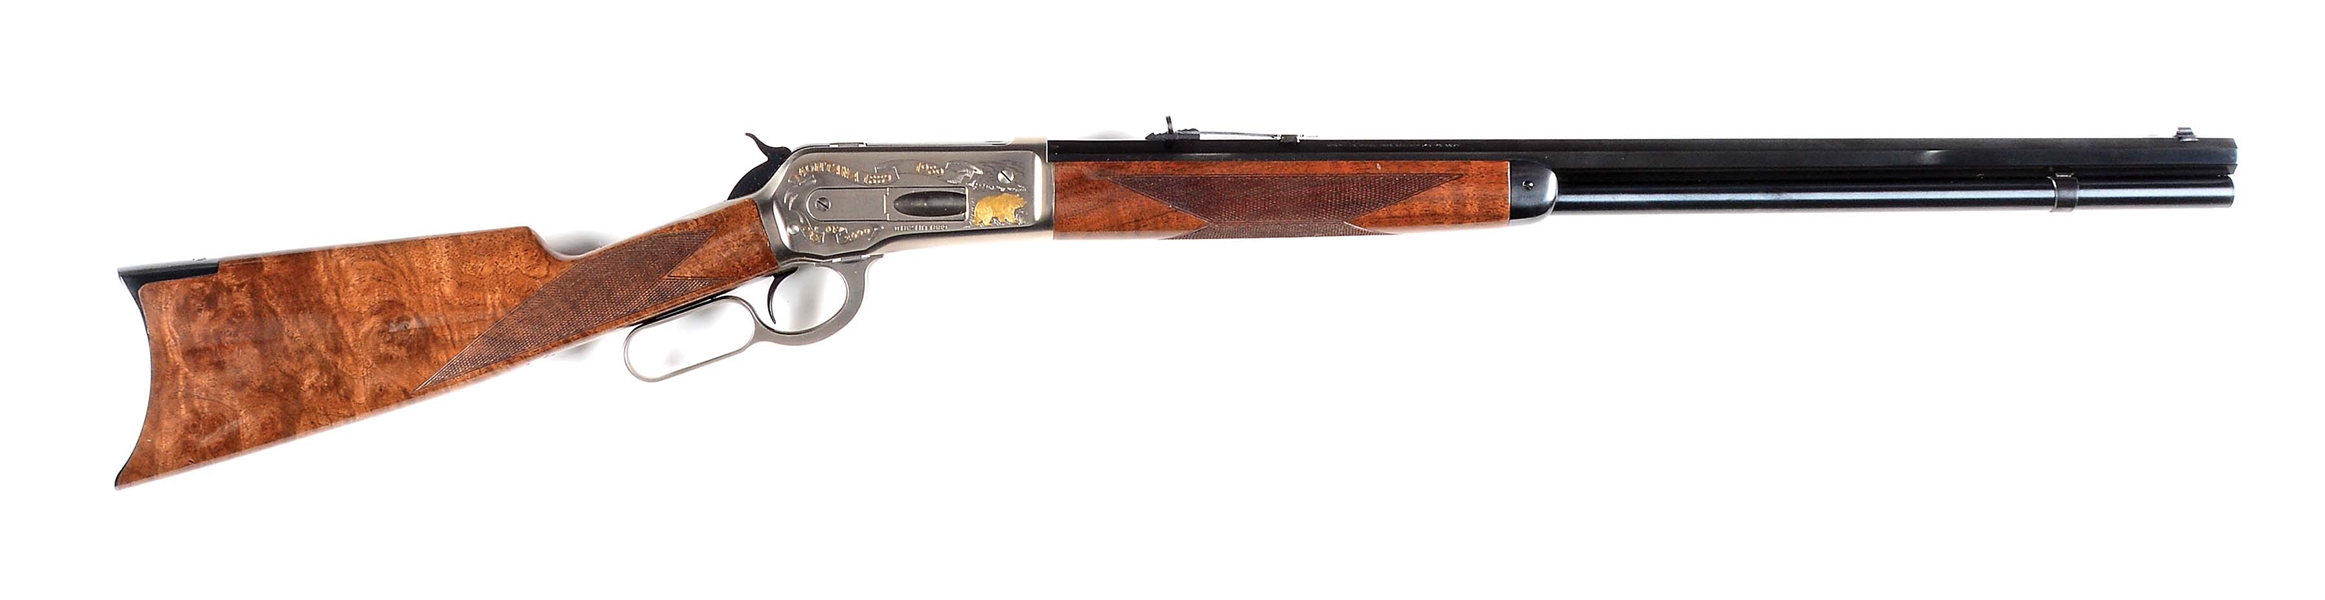 (M) BROWNING MODEL 1886 MONTANA CENTENNIAL .45-70 LEVER ACTION RIFLE.